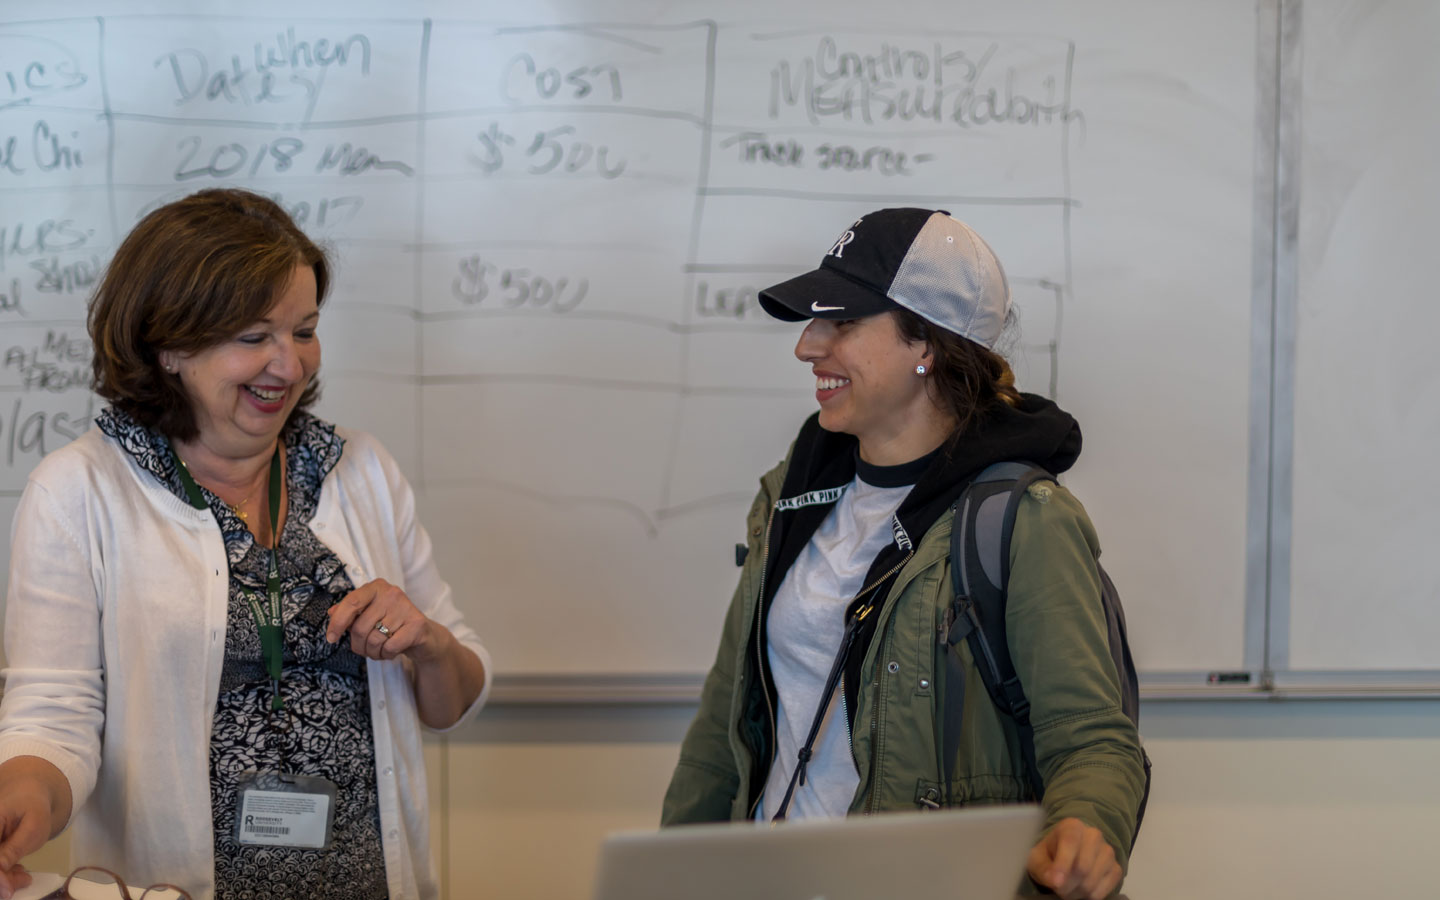 Student and instructor smiling in front of a classroom whiteboard.